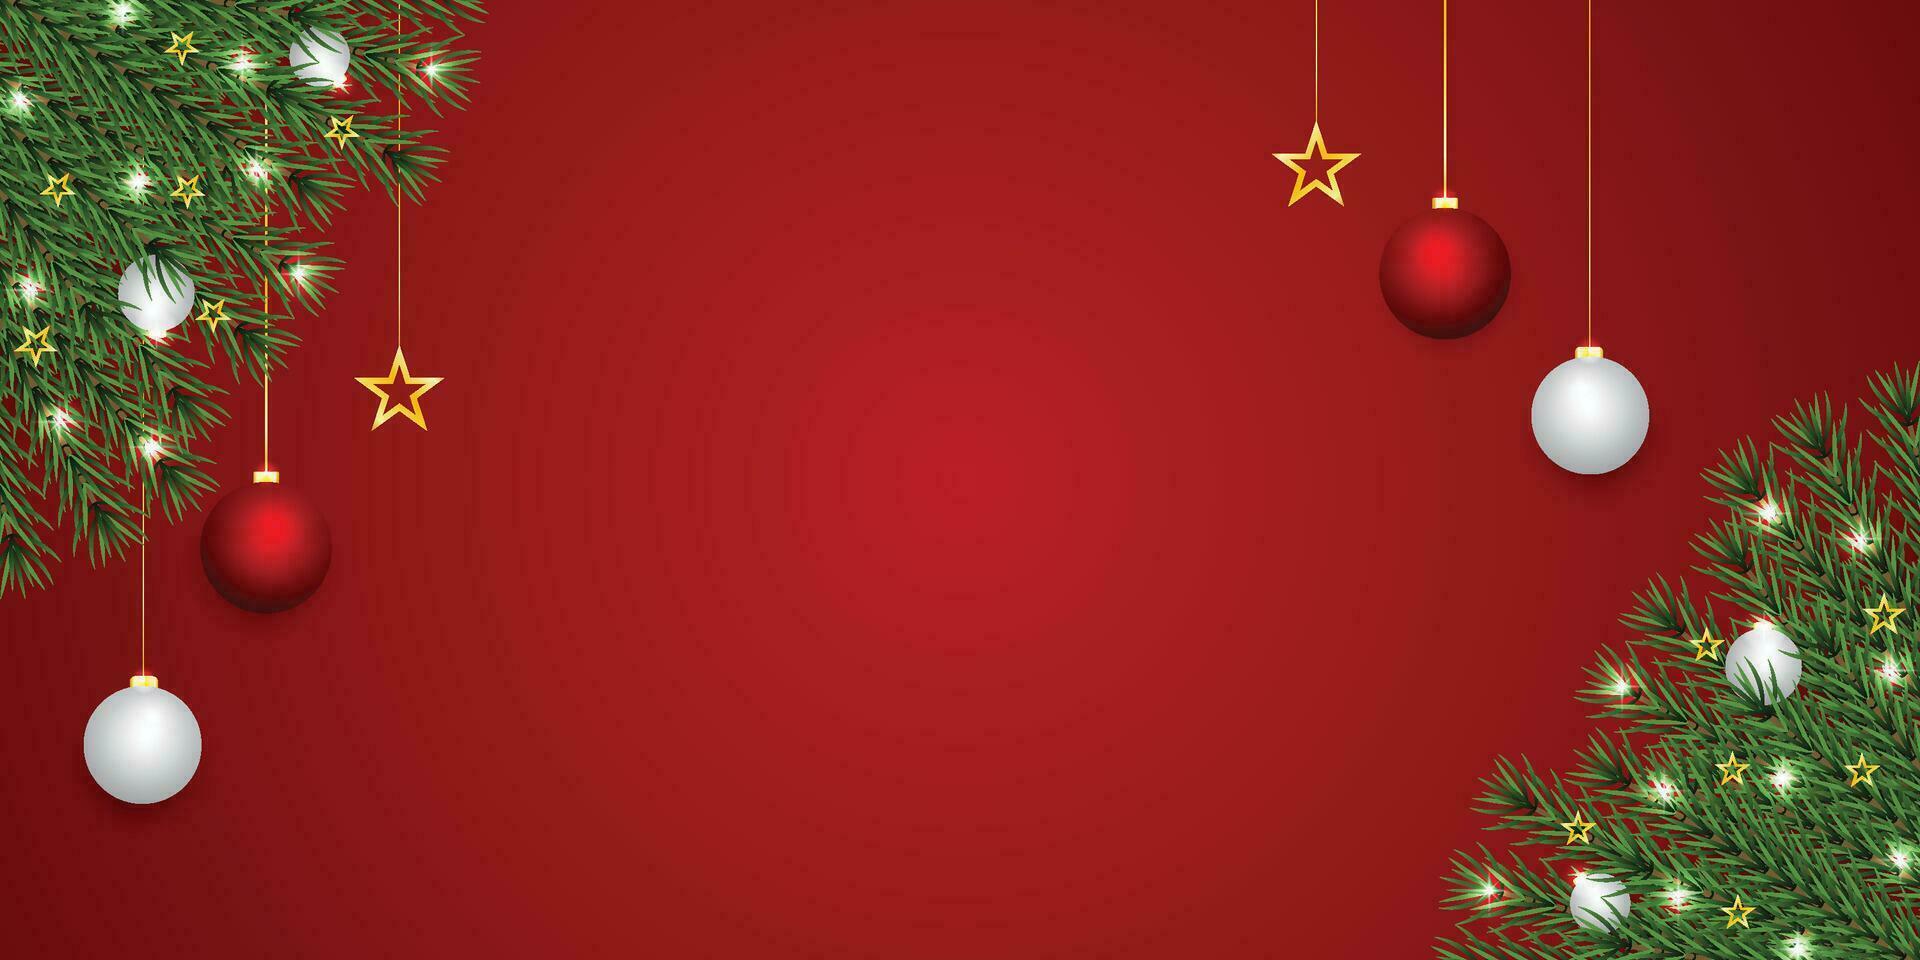 Realistic Christmas green leaf banner with red and white balls with lights and golden stars with red background. vector